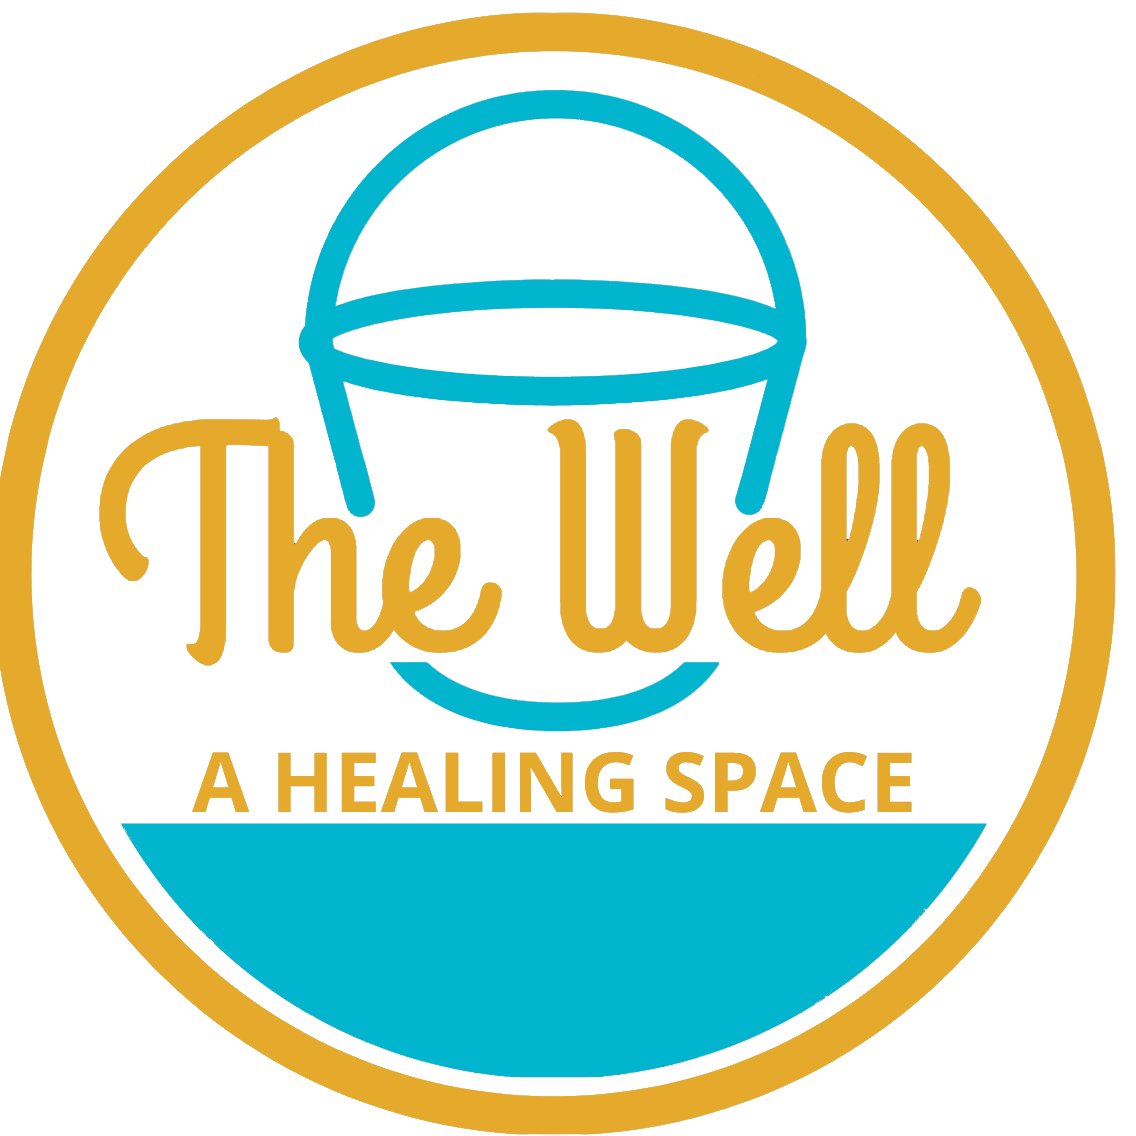 The Well is a healing space for individuals, families, & communities through a variety of mental health counseling, wellness & self-care services.